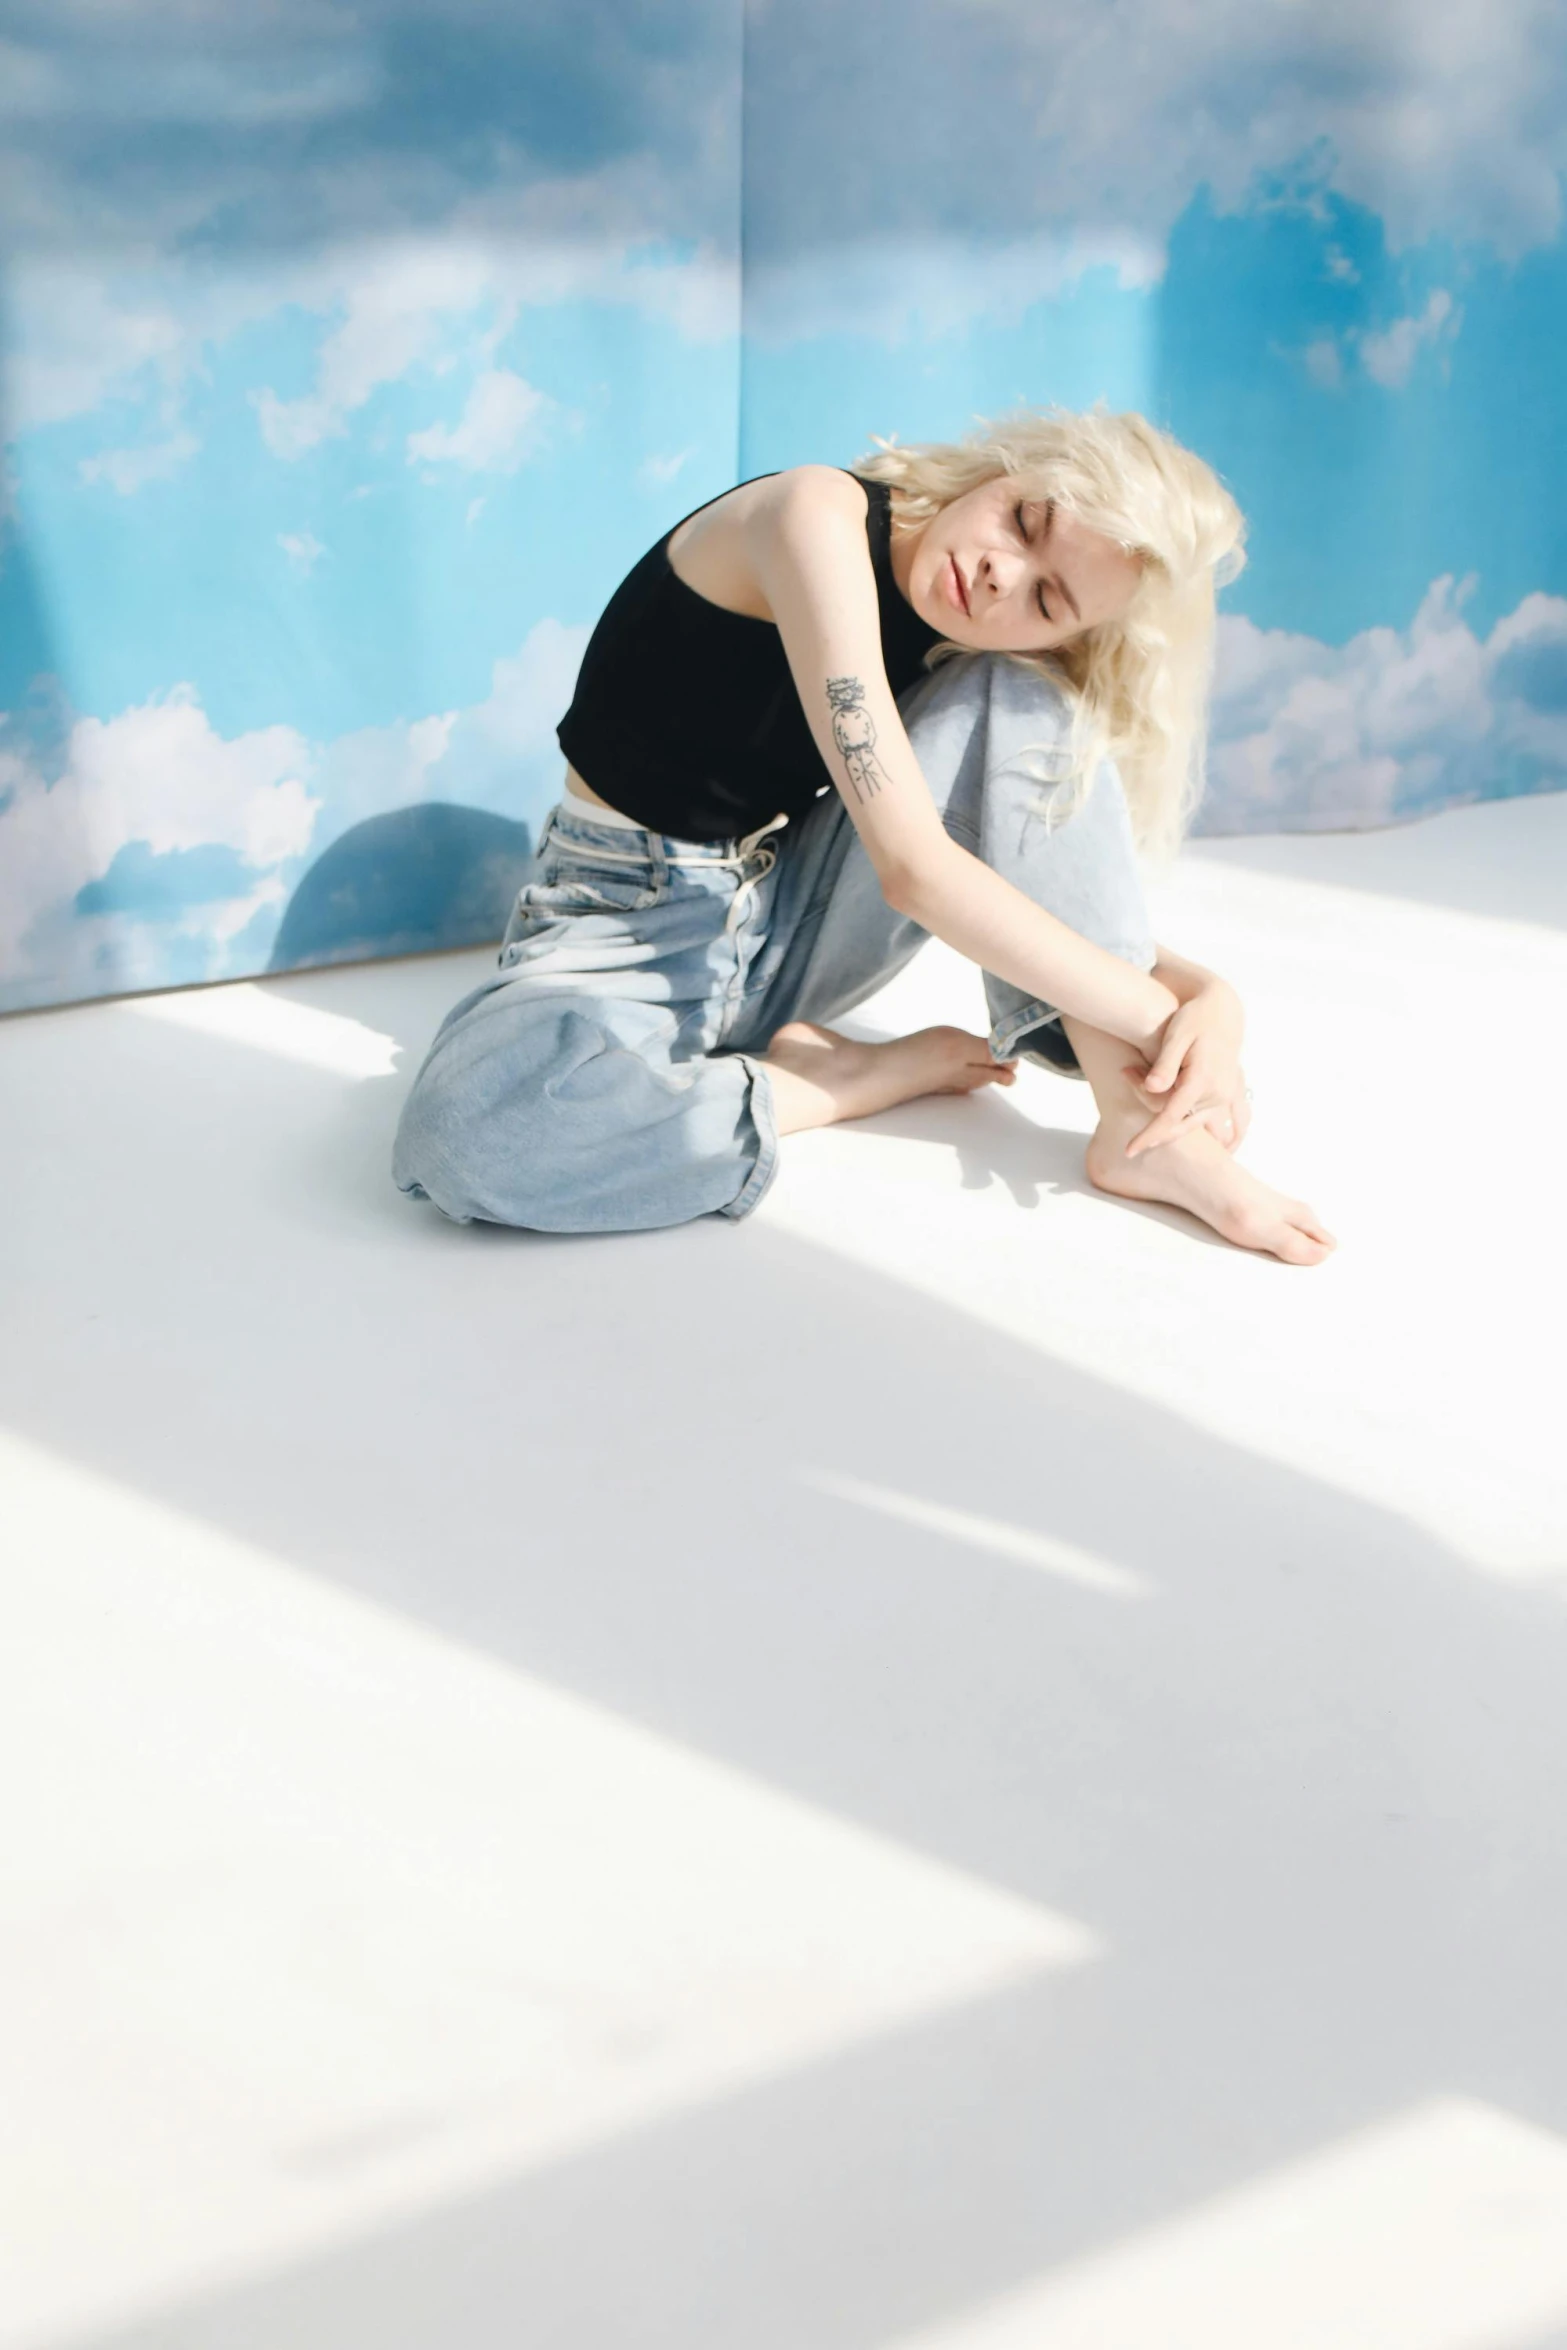 a woman sitting on top of a white floor, an album cover, inspired by Elsa Bleda, photorealism, pale hair, with clouds in the sky, blue jeans, pale fair skin!!